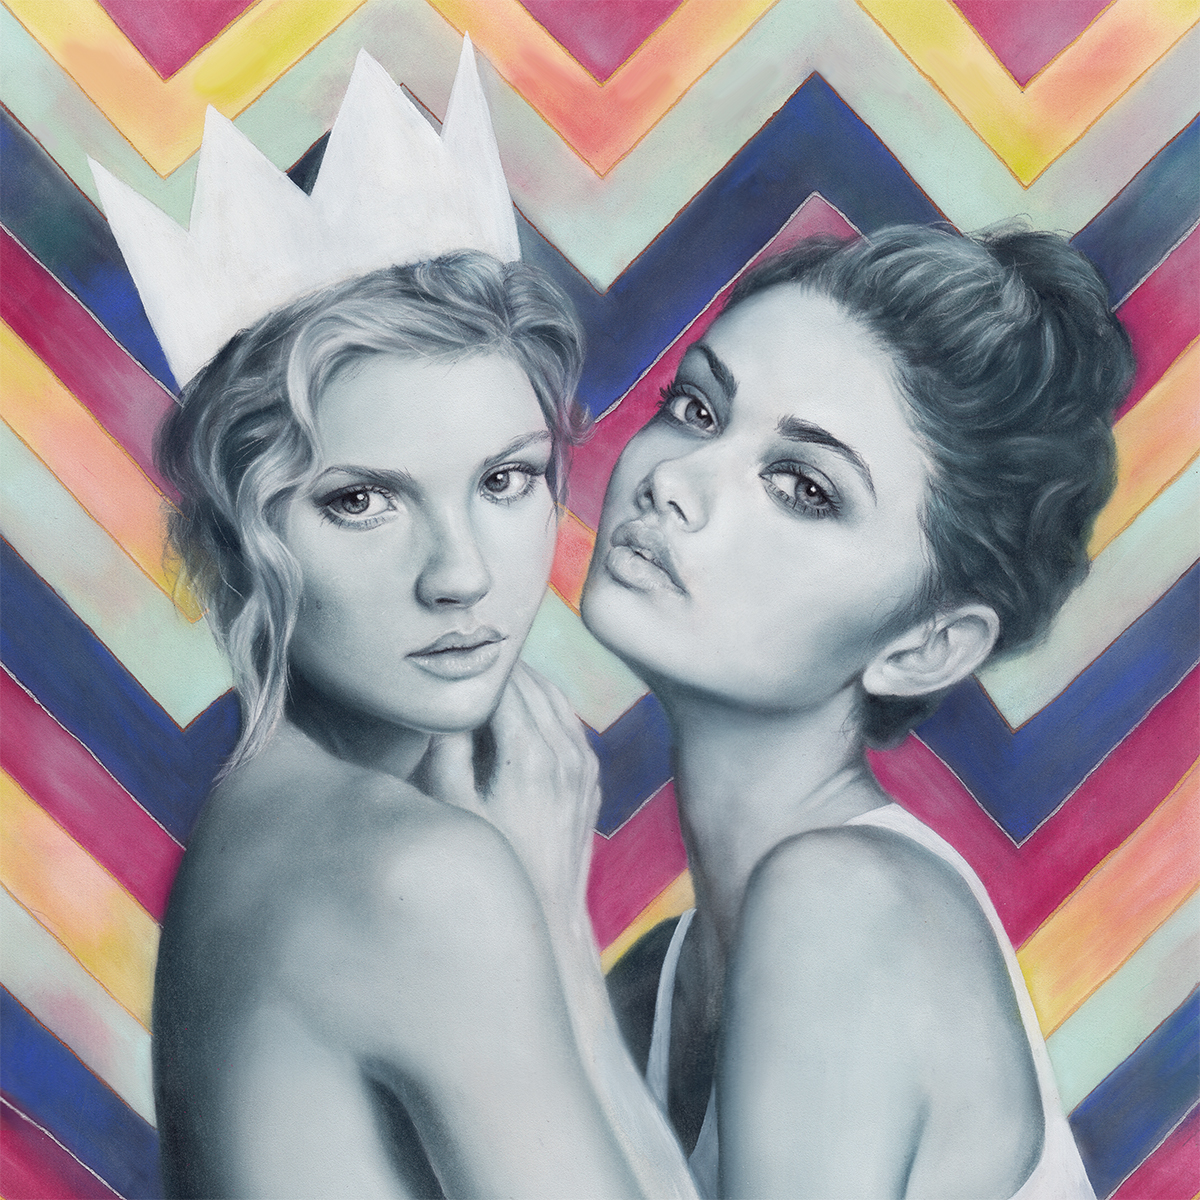   Untitled Two&nbsp; . Pastel and pencil on paper . 35 x 35 cm . 2014 2nd Annual Prisma Collective Show . WWA Gallery, Culver City, US&nbsp; 